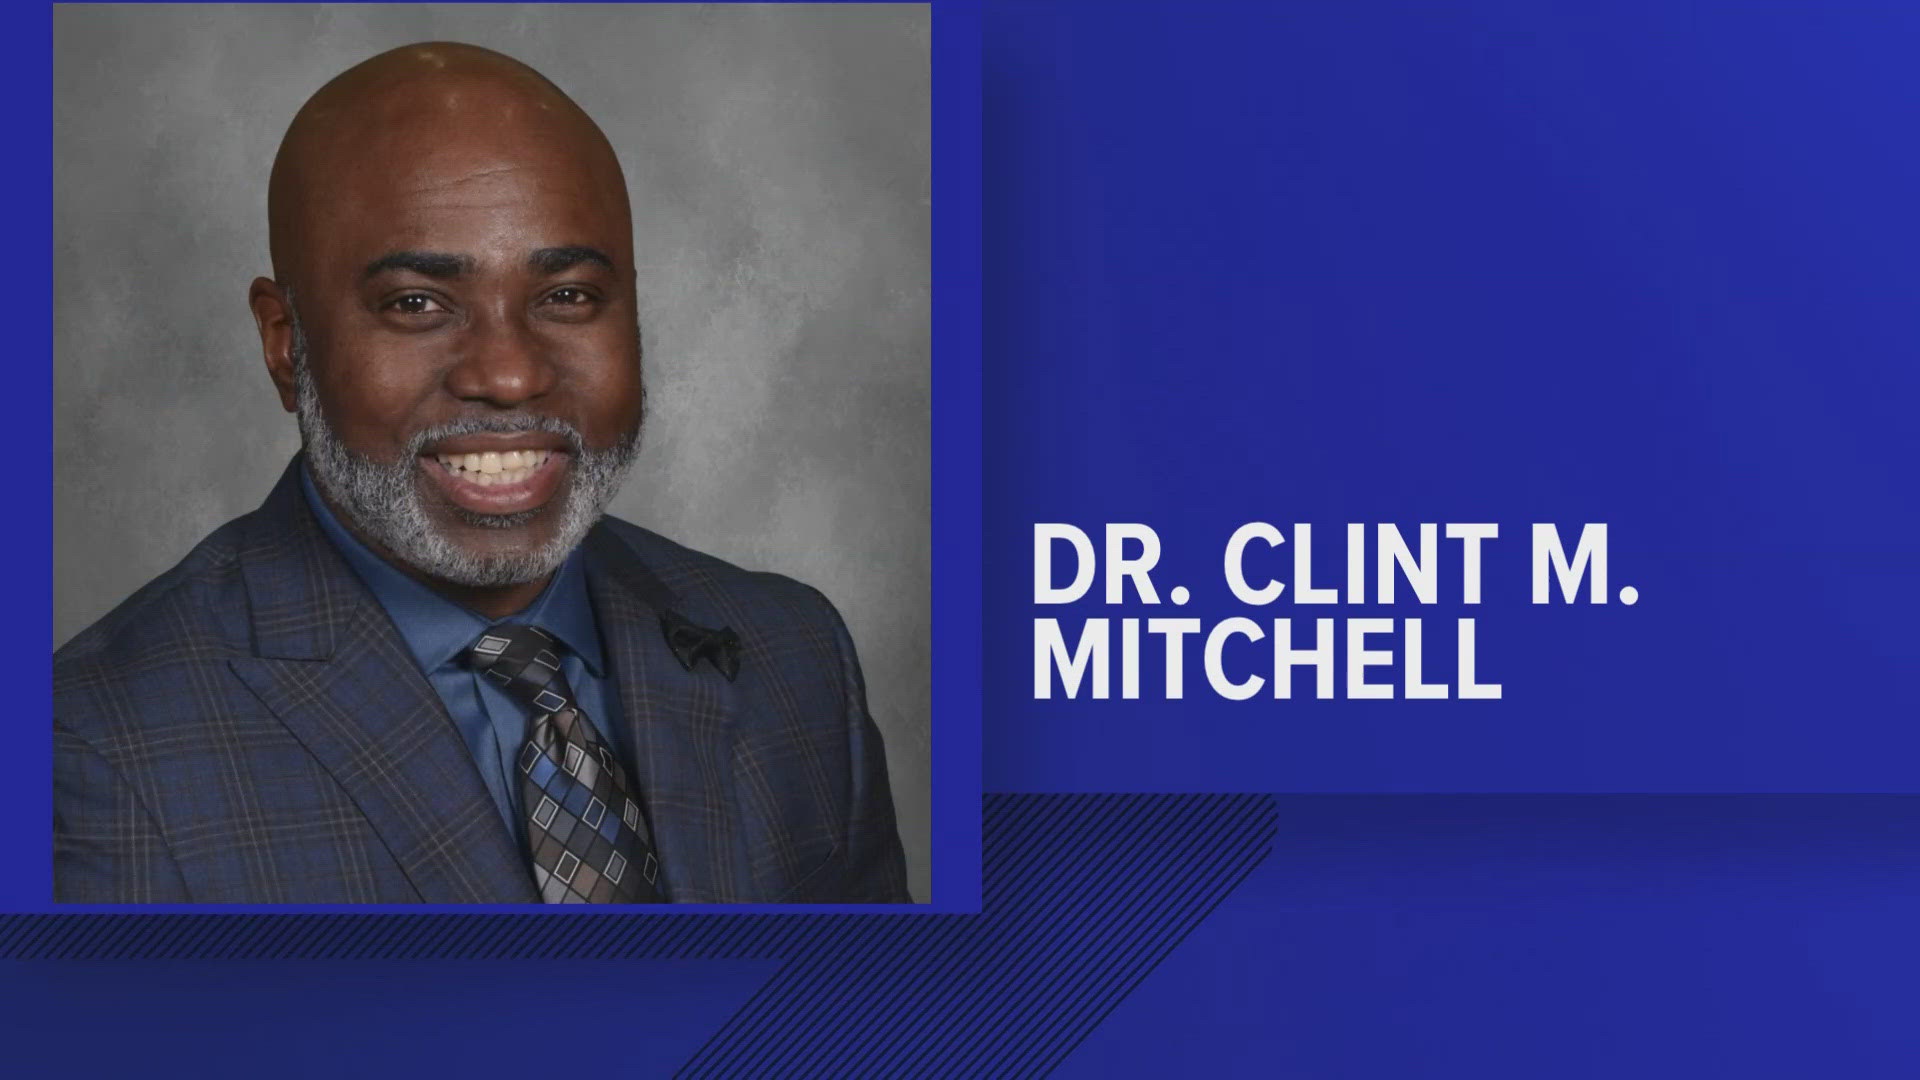 ​The school board announced Mitchell as the new superintended Monday night at a school board meeting, citing his 19 years of educational leadership experience.